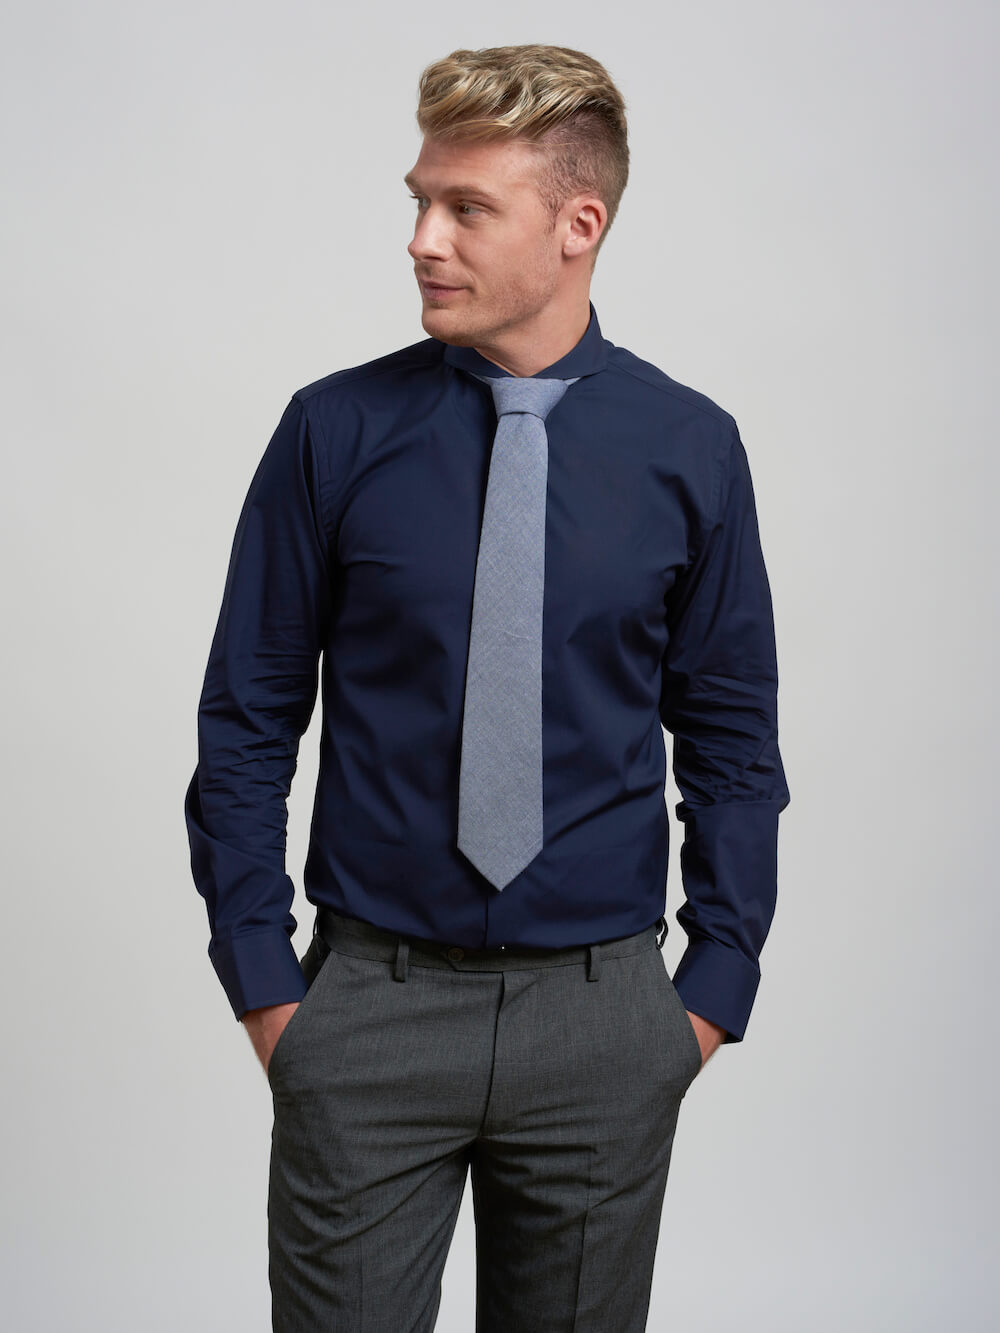 The Navy Stretch Cotton | Product - Eph Apparel